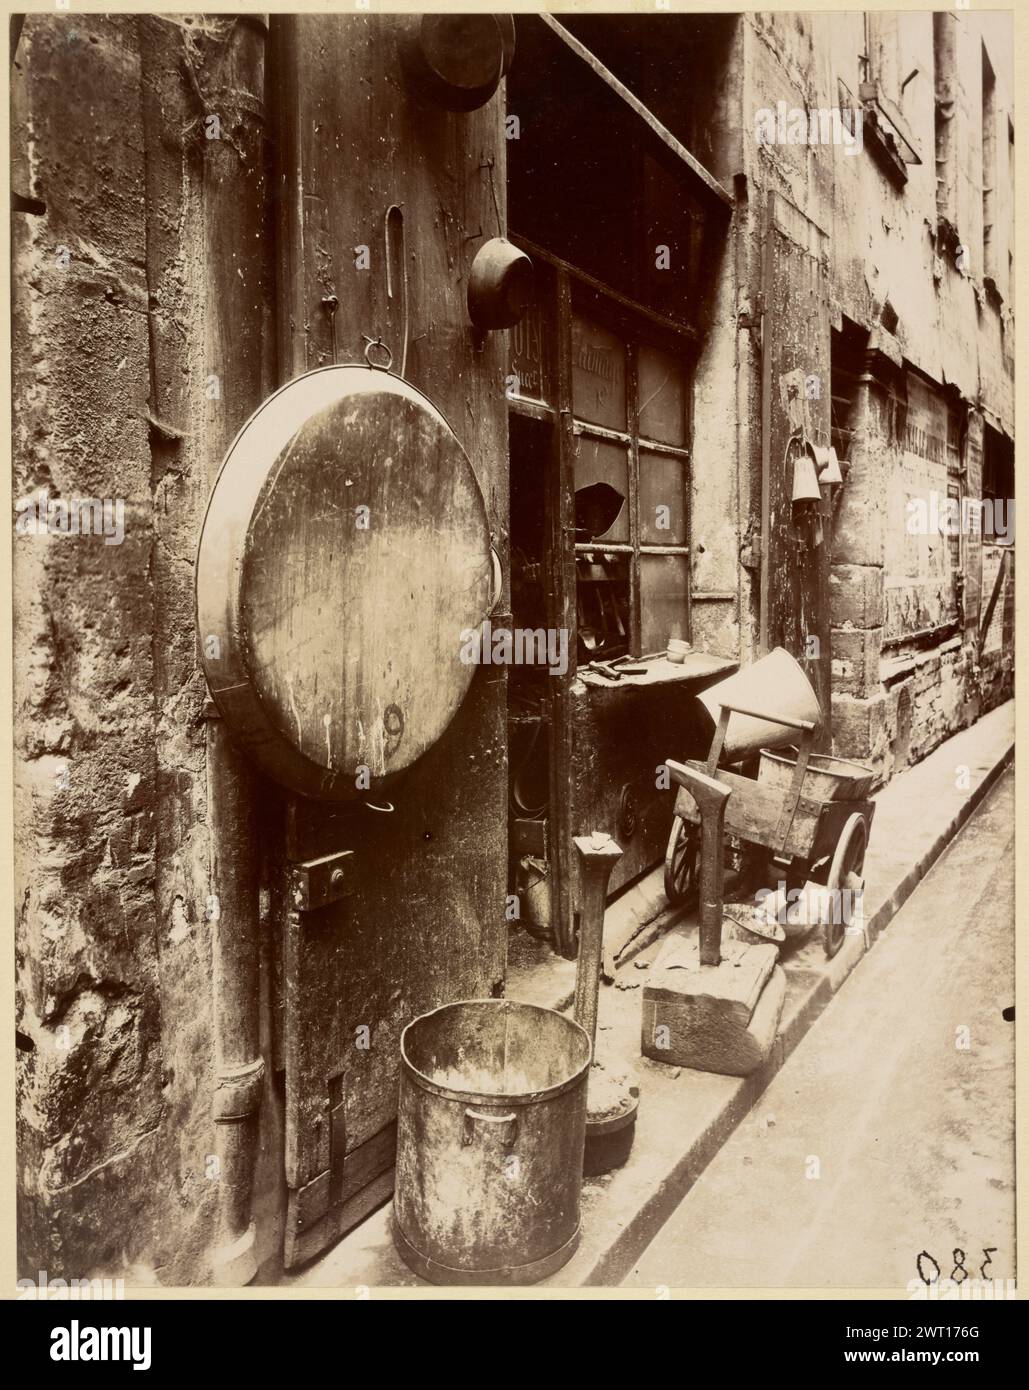 Rue de la Reynie Tin Smith's shop. Eugène Atget, photographer (French, 1857 - 1927) 1912 This bleak view documents the commercial use by the urban working class of cramped public or quasi-public spaces. In this photograph, the implements from a tinsmith's shop have spilled out onto the sidewalk. Judging by the tools on the windowsill and the scraps on the pavement, the smith worked in the street itself, traffic permitting. Teapots, various pots and pans, and a large, round basin hang next to the darkened shop door and grimy window. A barrow for picking up damaged goods and delivering mended ut Stock Photo